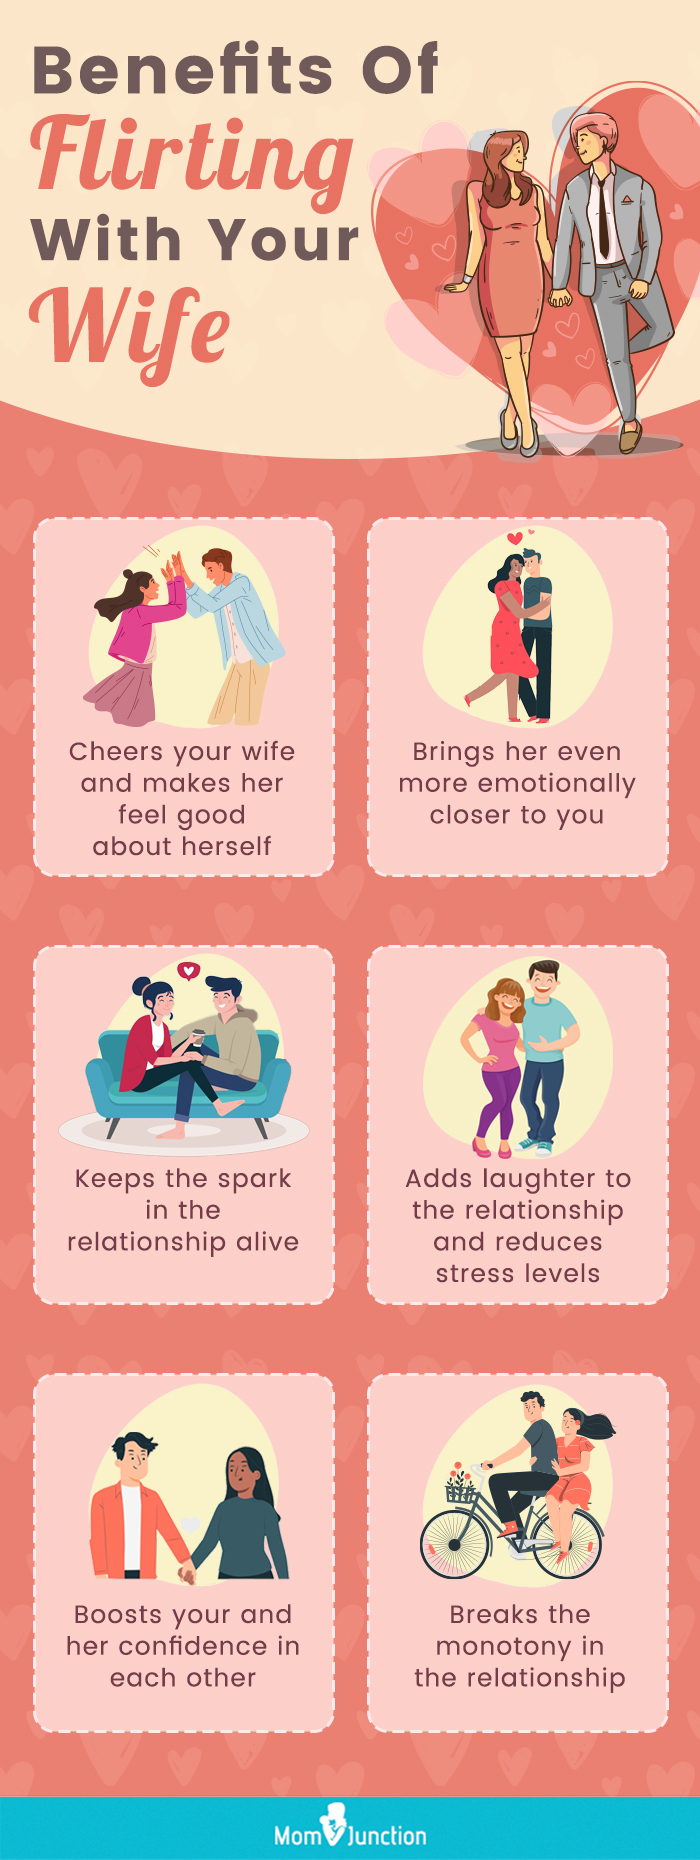 benefits of flirting with your wife (infographic)